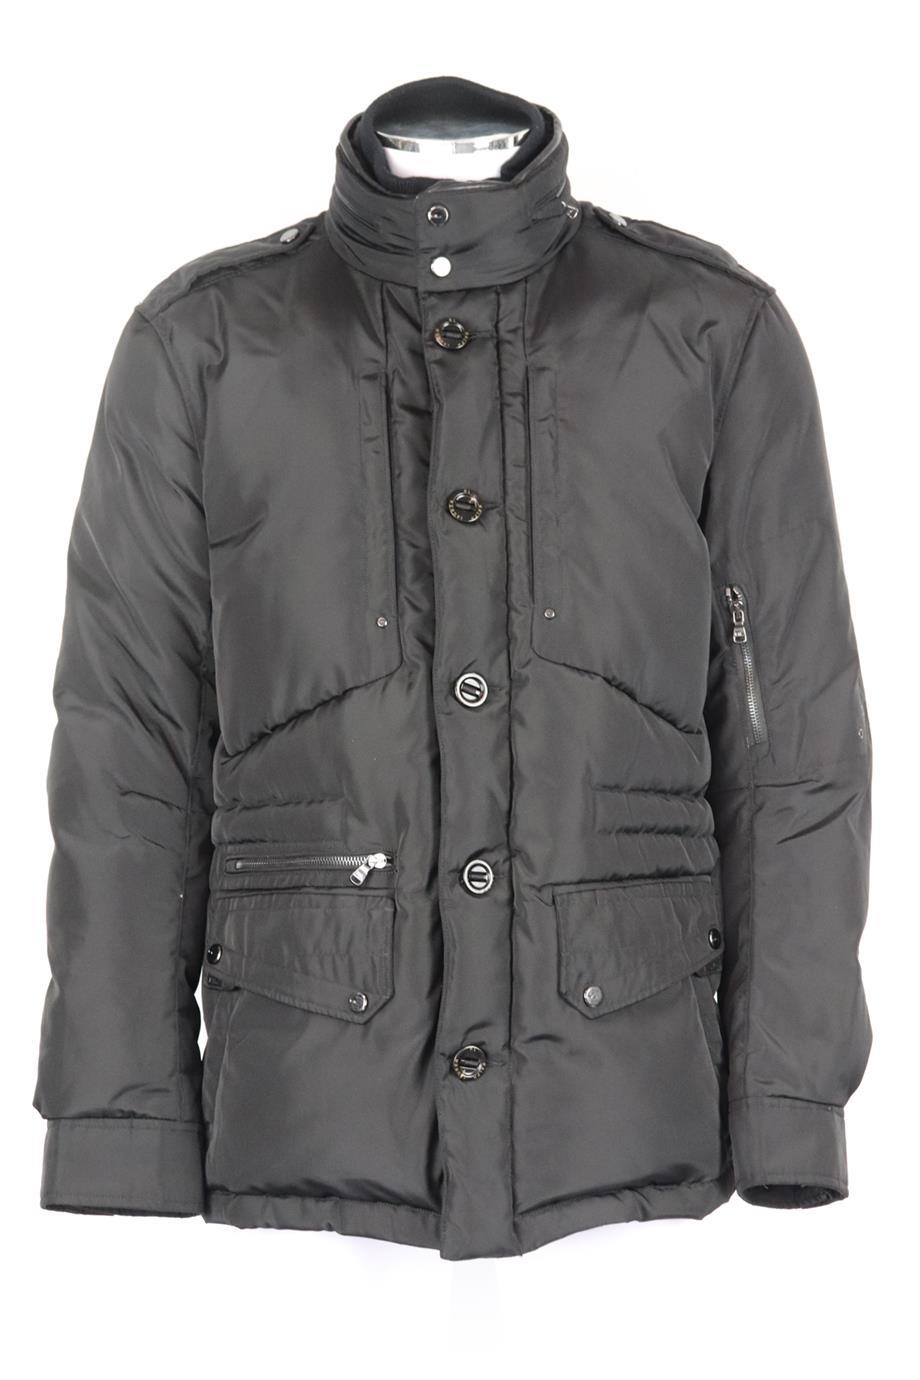 Ralph Lauren Black Label men's quilted gabardine down jacket. Black. Long sleeve, turtleneck. Zip fastening at front. 100% Polyester; body lining: 100% nylon; sleeve lining: 100% cupro; filling: 80% down, 20% feather. Size: Large (IT 50, EU 50,